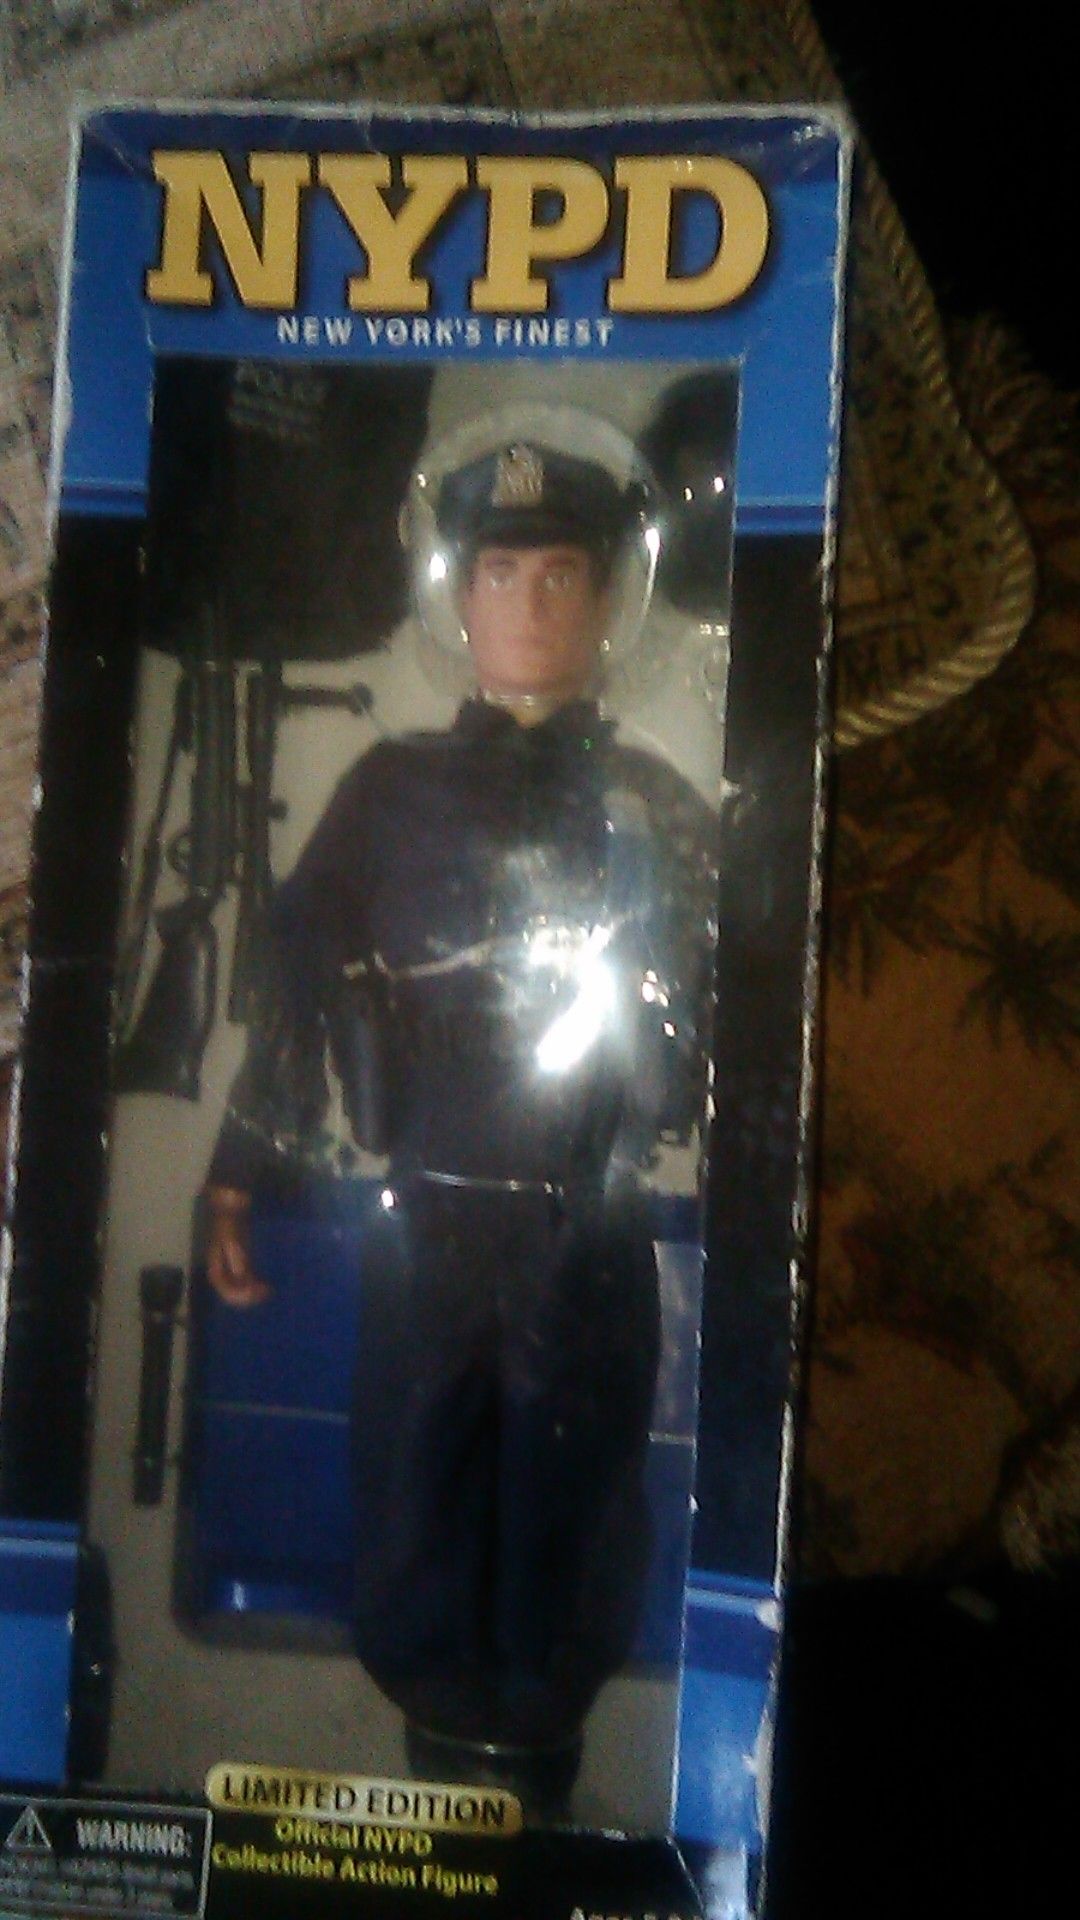 NYPD Action Figure